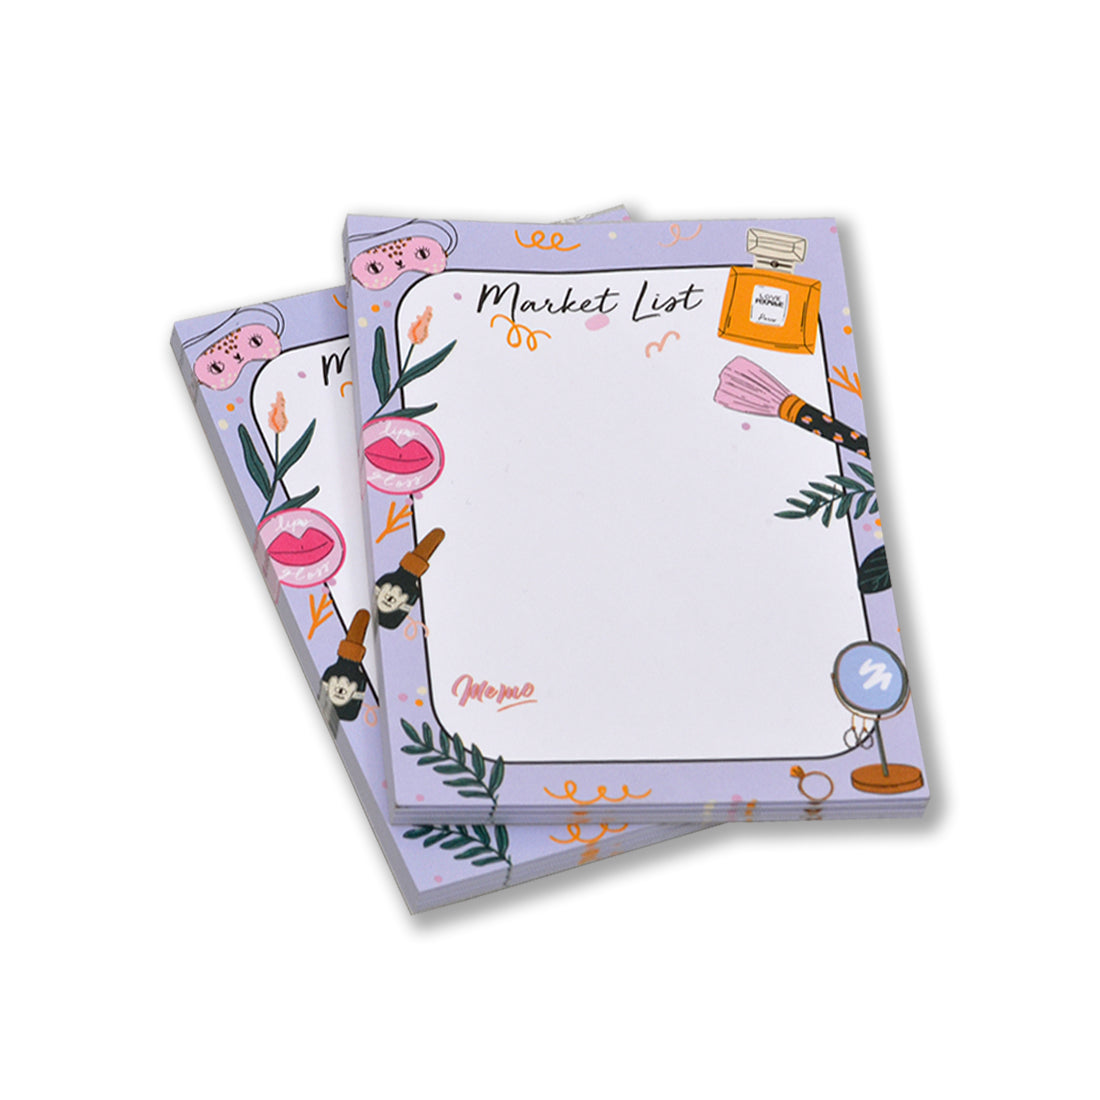 TO DO List Notepad, 50 Page Planner Pad Daily Checklist & Note Sections. Desk Notebook Pad to Organize Office